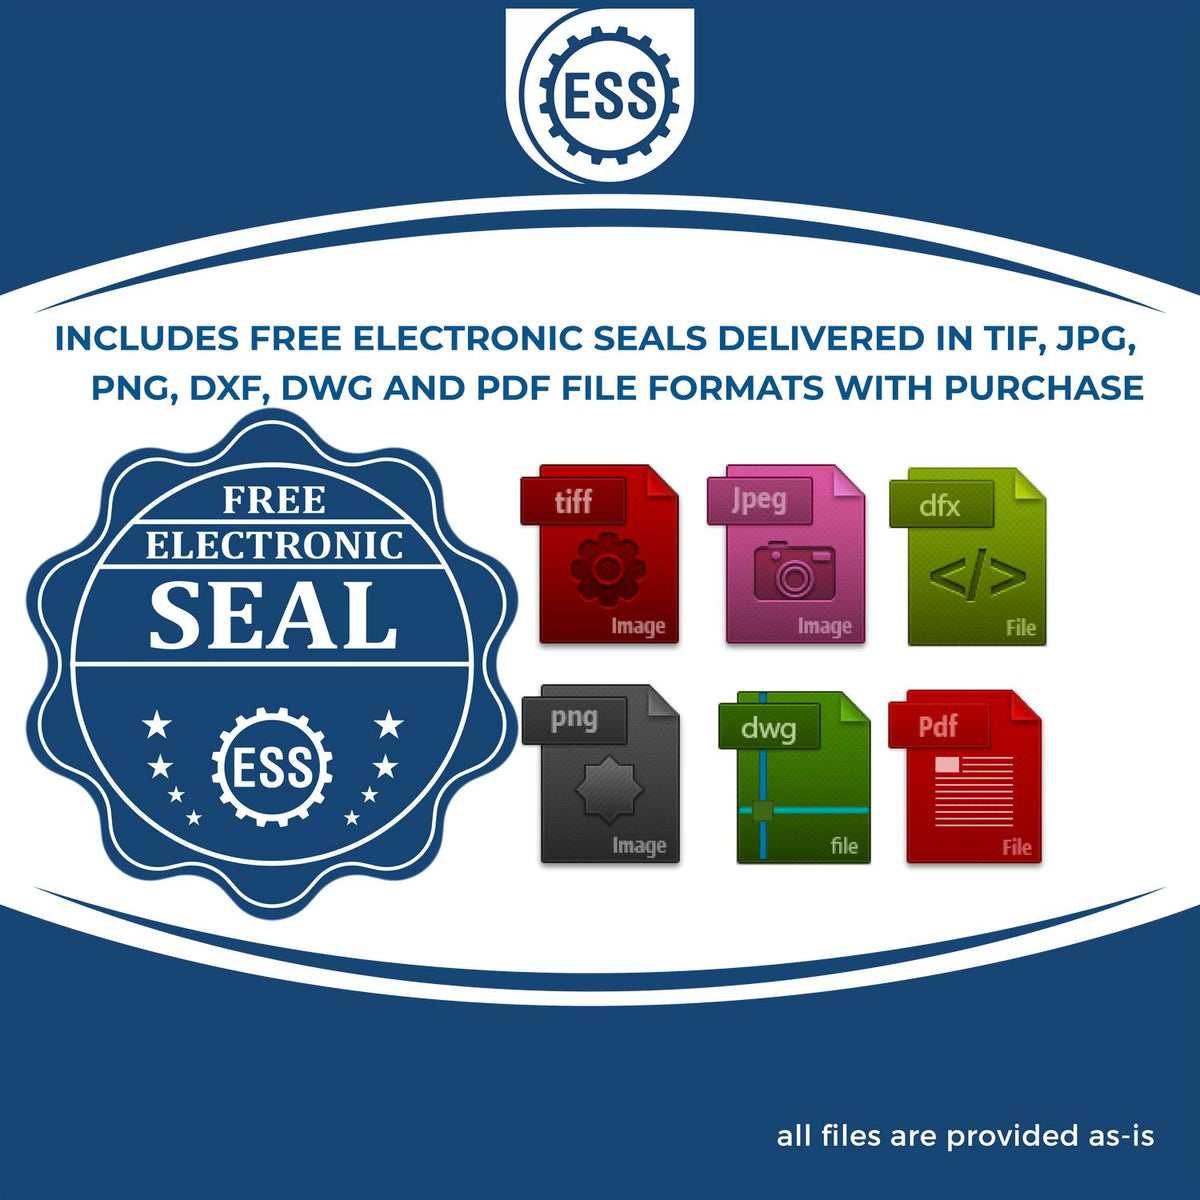 An infographic for the free electronic seal for the State of Missouri Extended Long Reach Geologist Seal illustrating the different file type icons such as DXF, DWG, TIF, JPG and PNG.